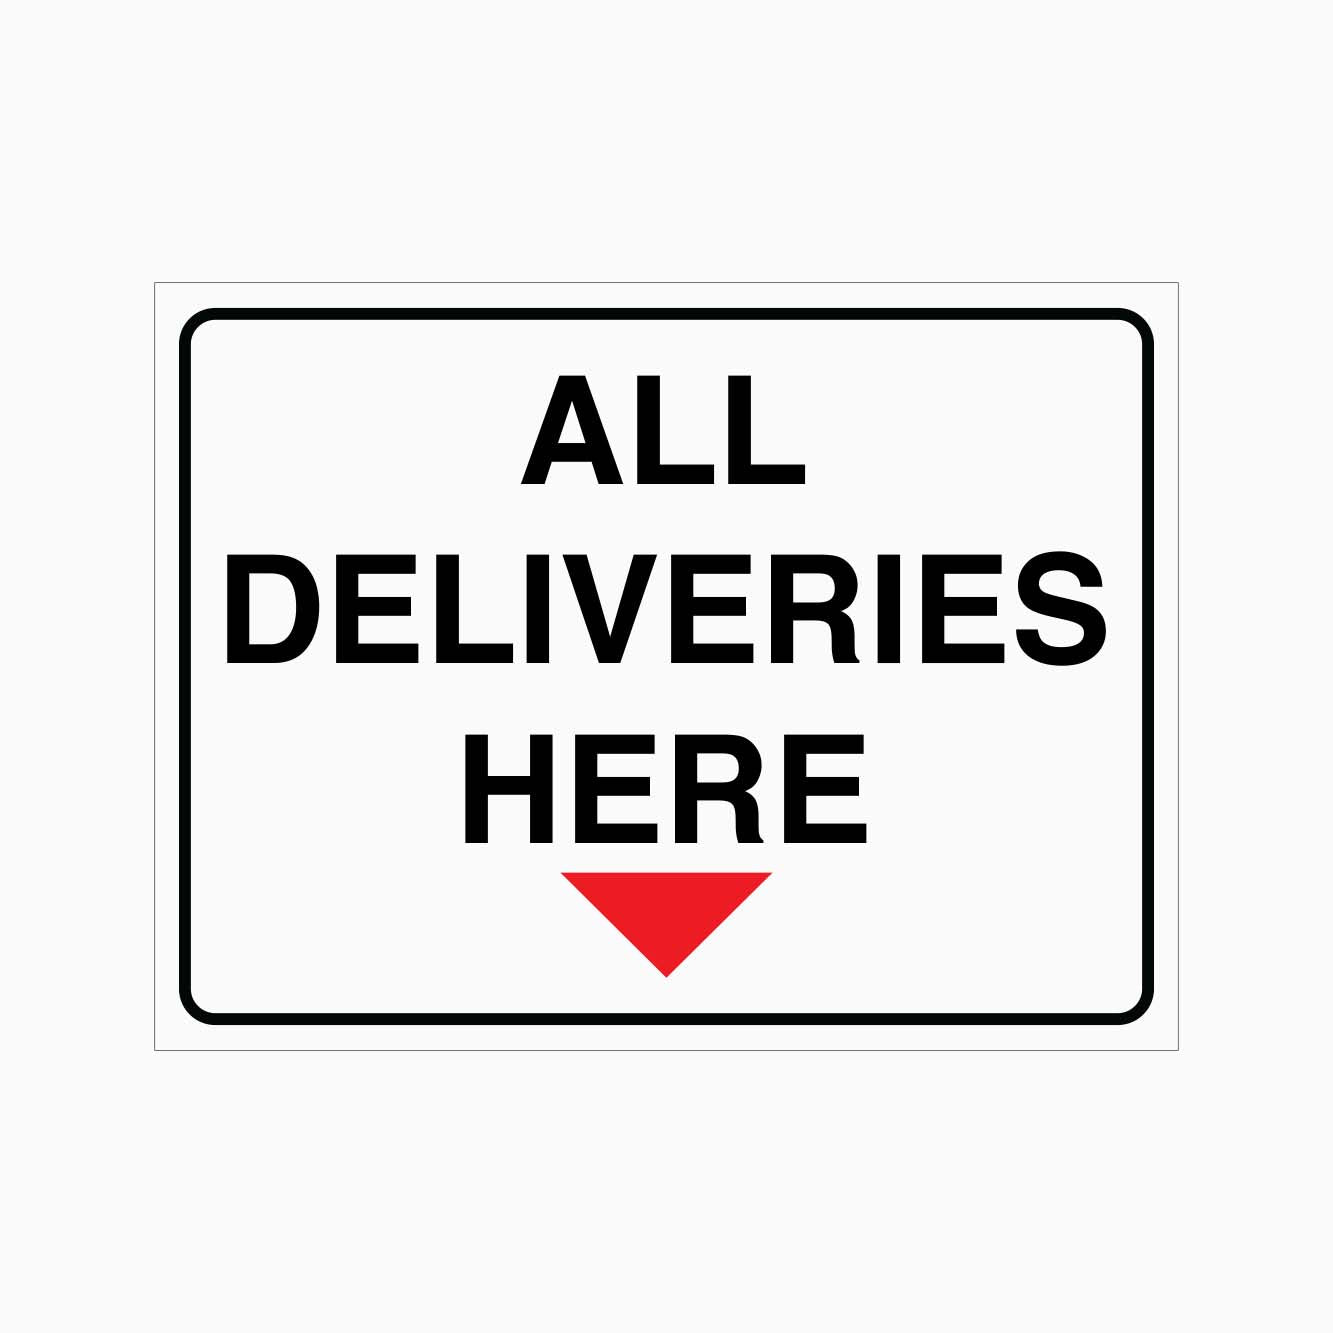 ALL DELIVERIES HERE SIGN - GET SIGNS